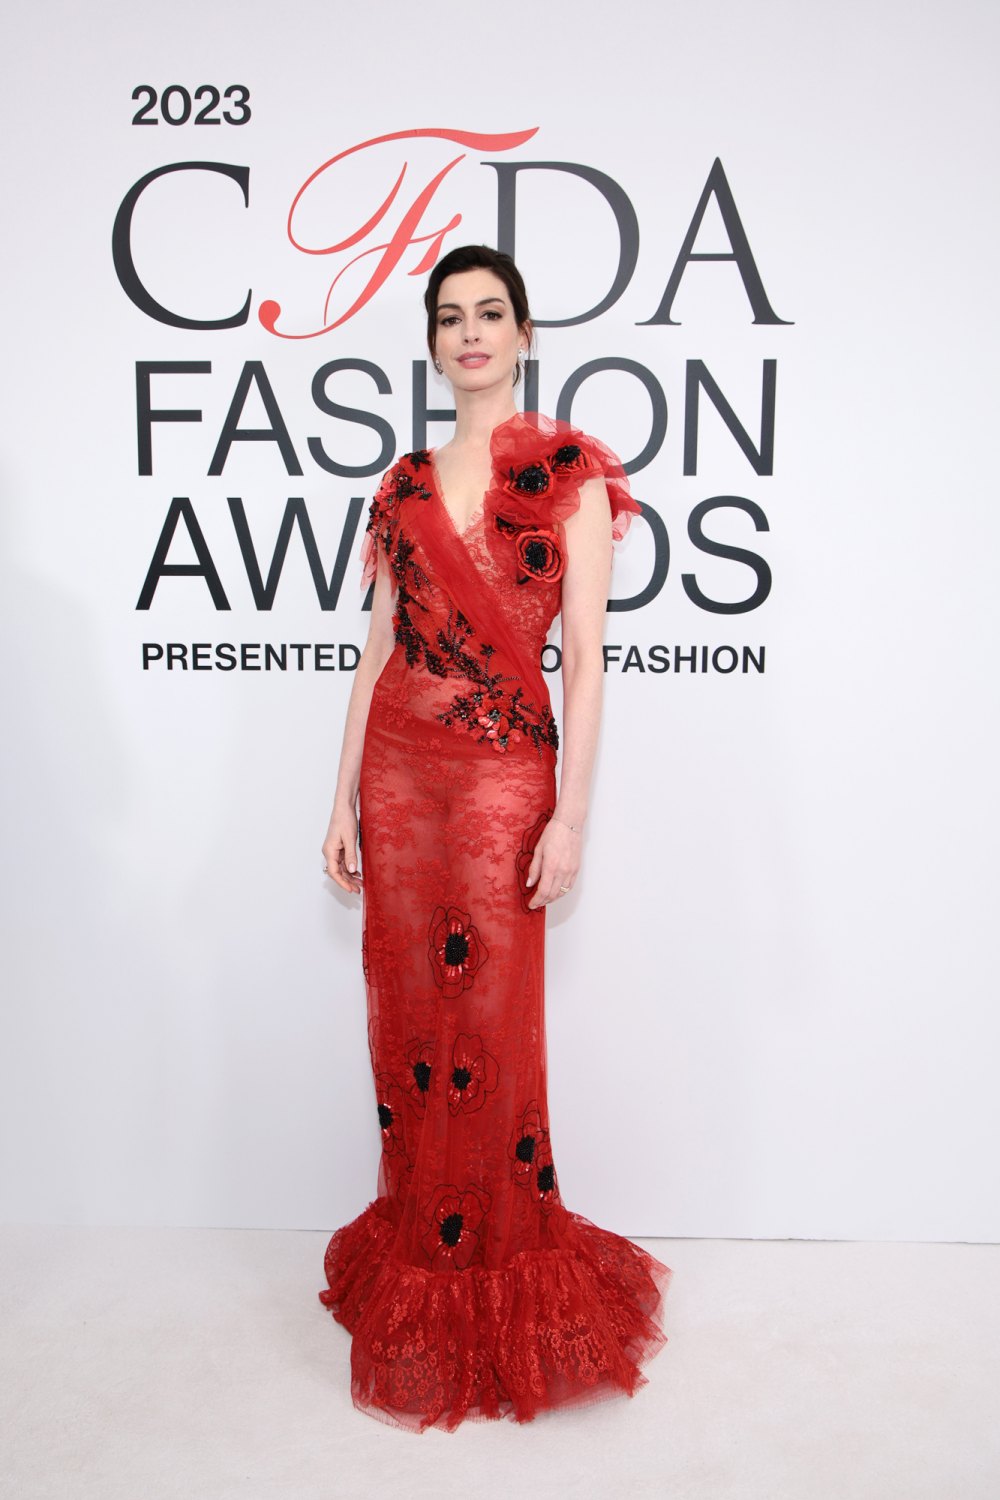 Anne Hathaway wore two dresses to the CFDA Awards